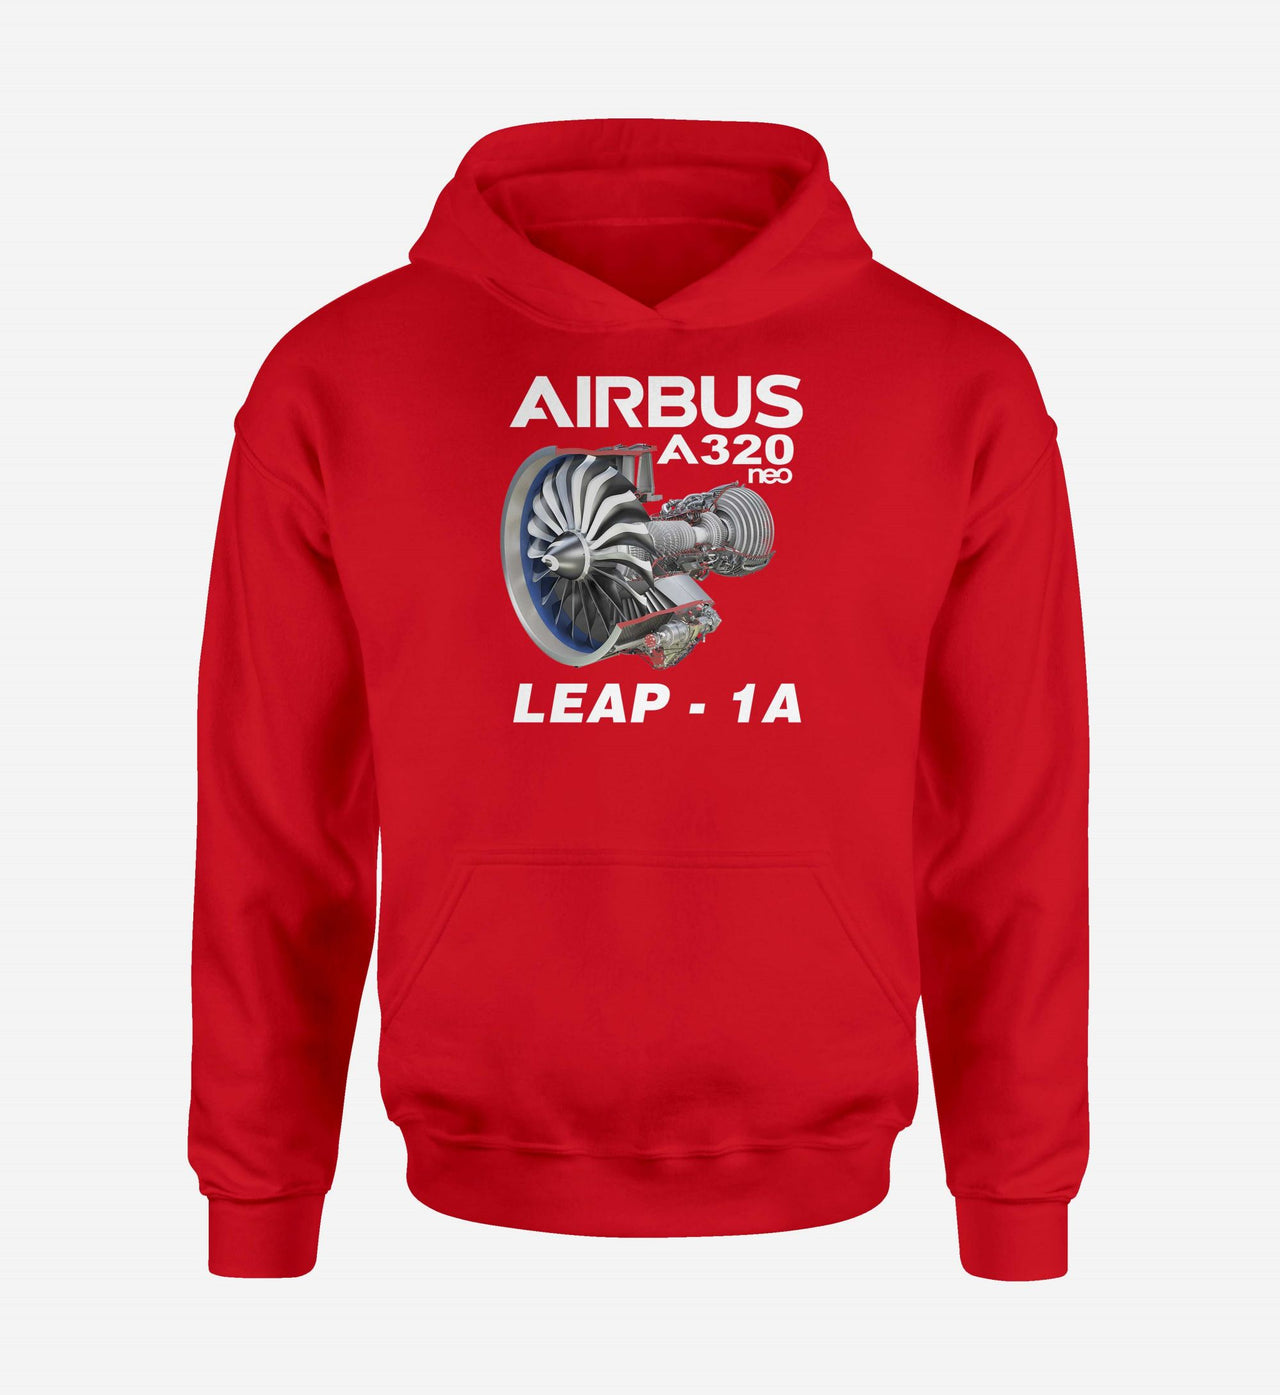 Airbus A320neo & Leap 1A Designed Hoodies